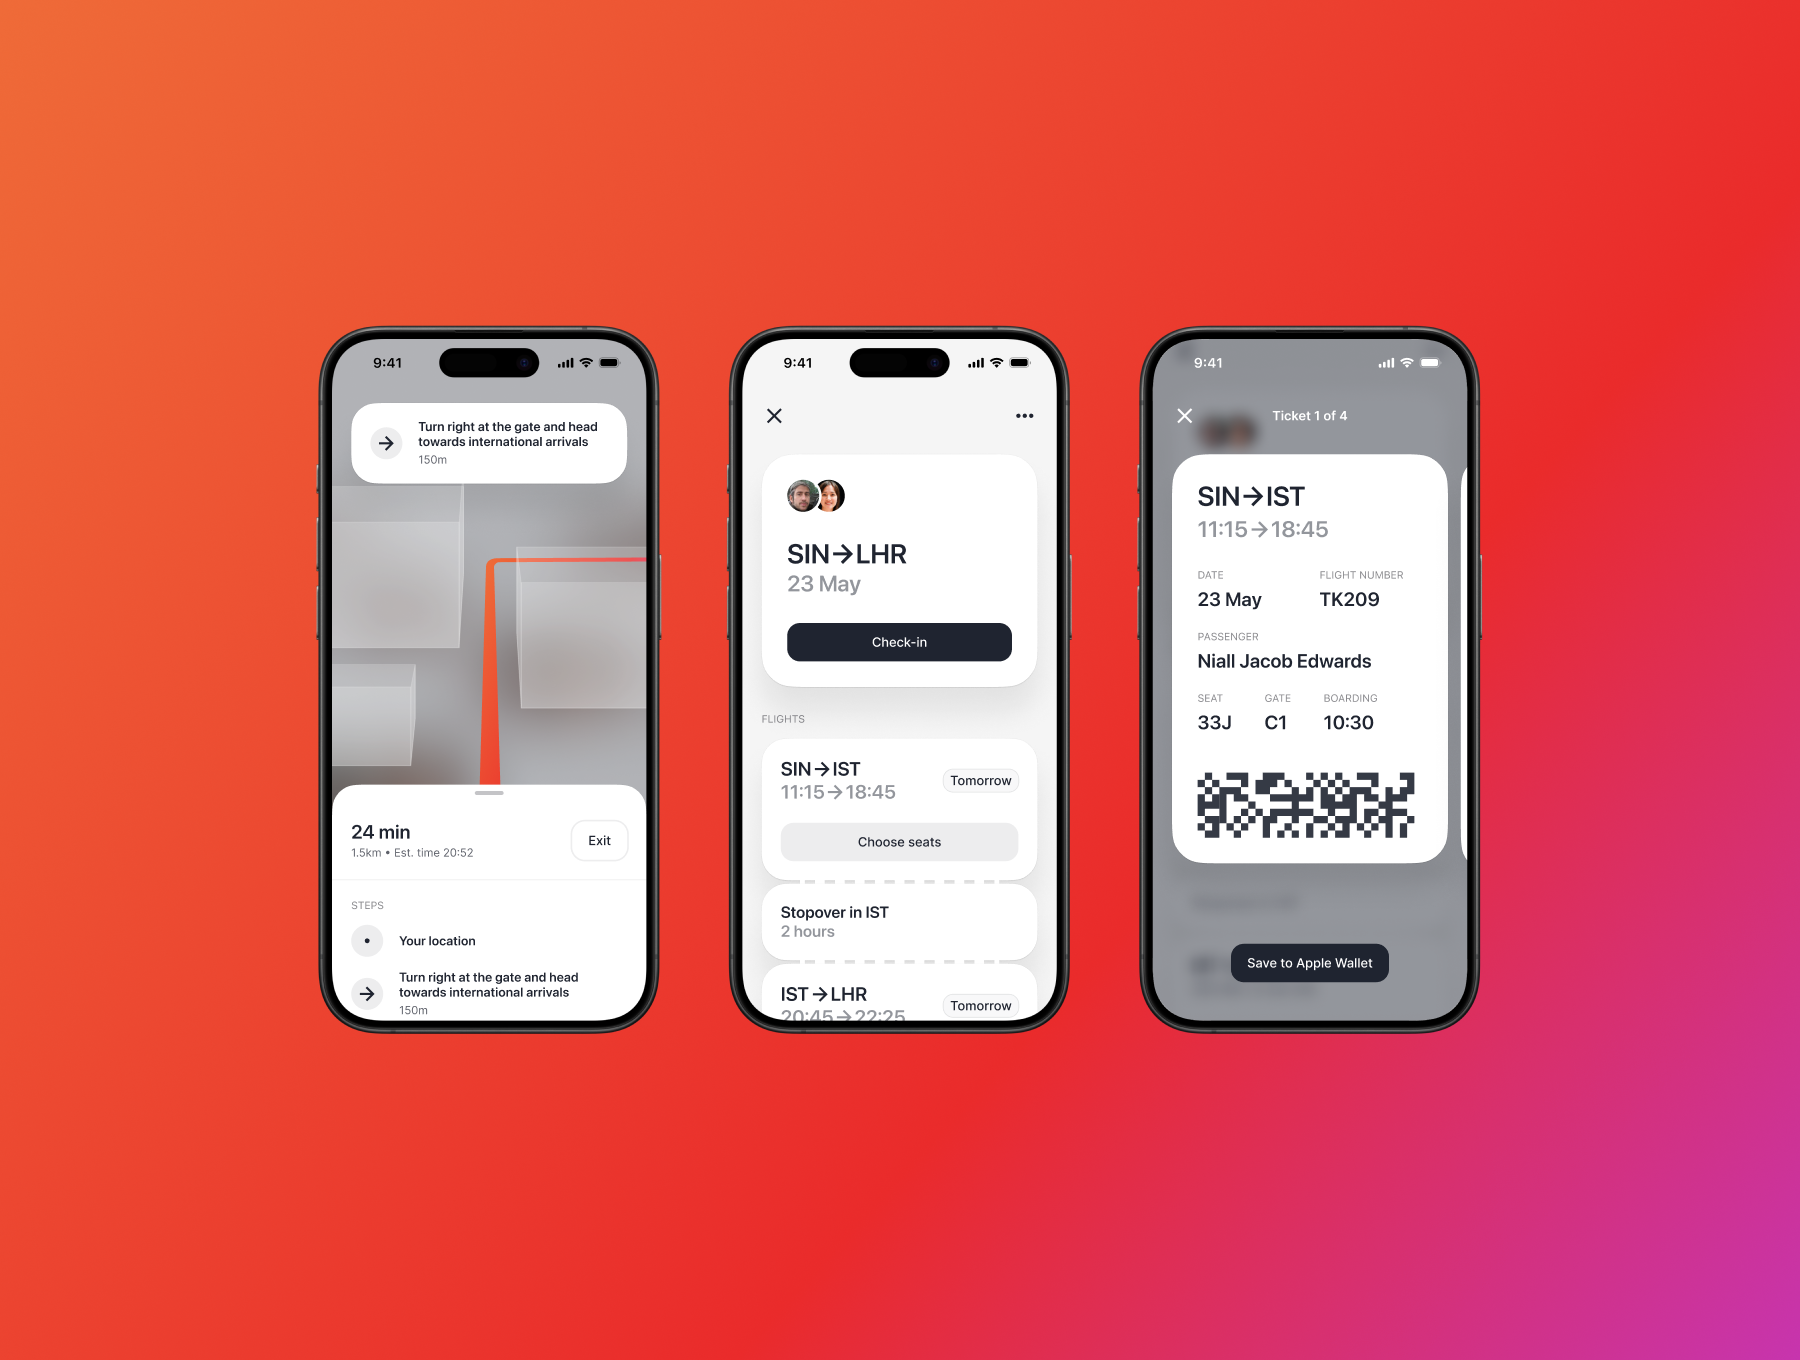 App design for helping airlines to handle delays and missed connections